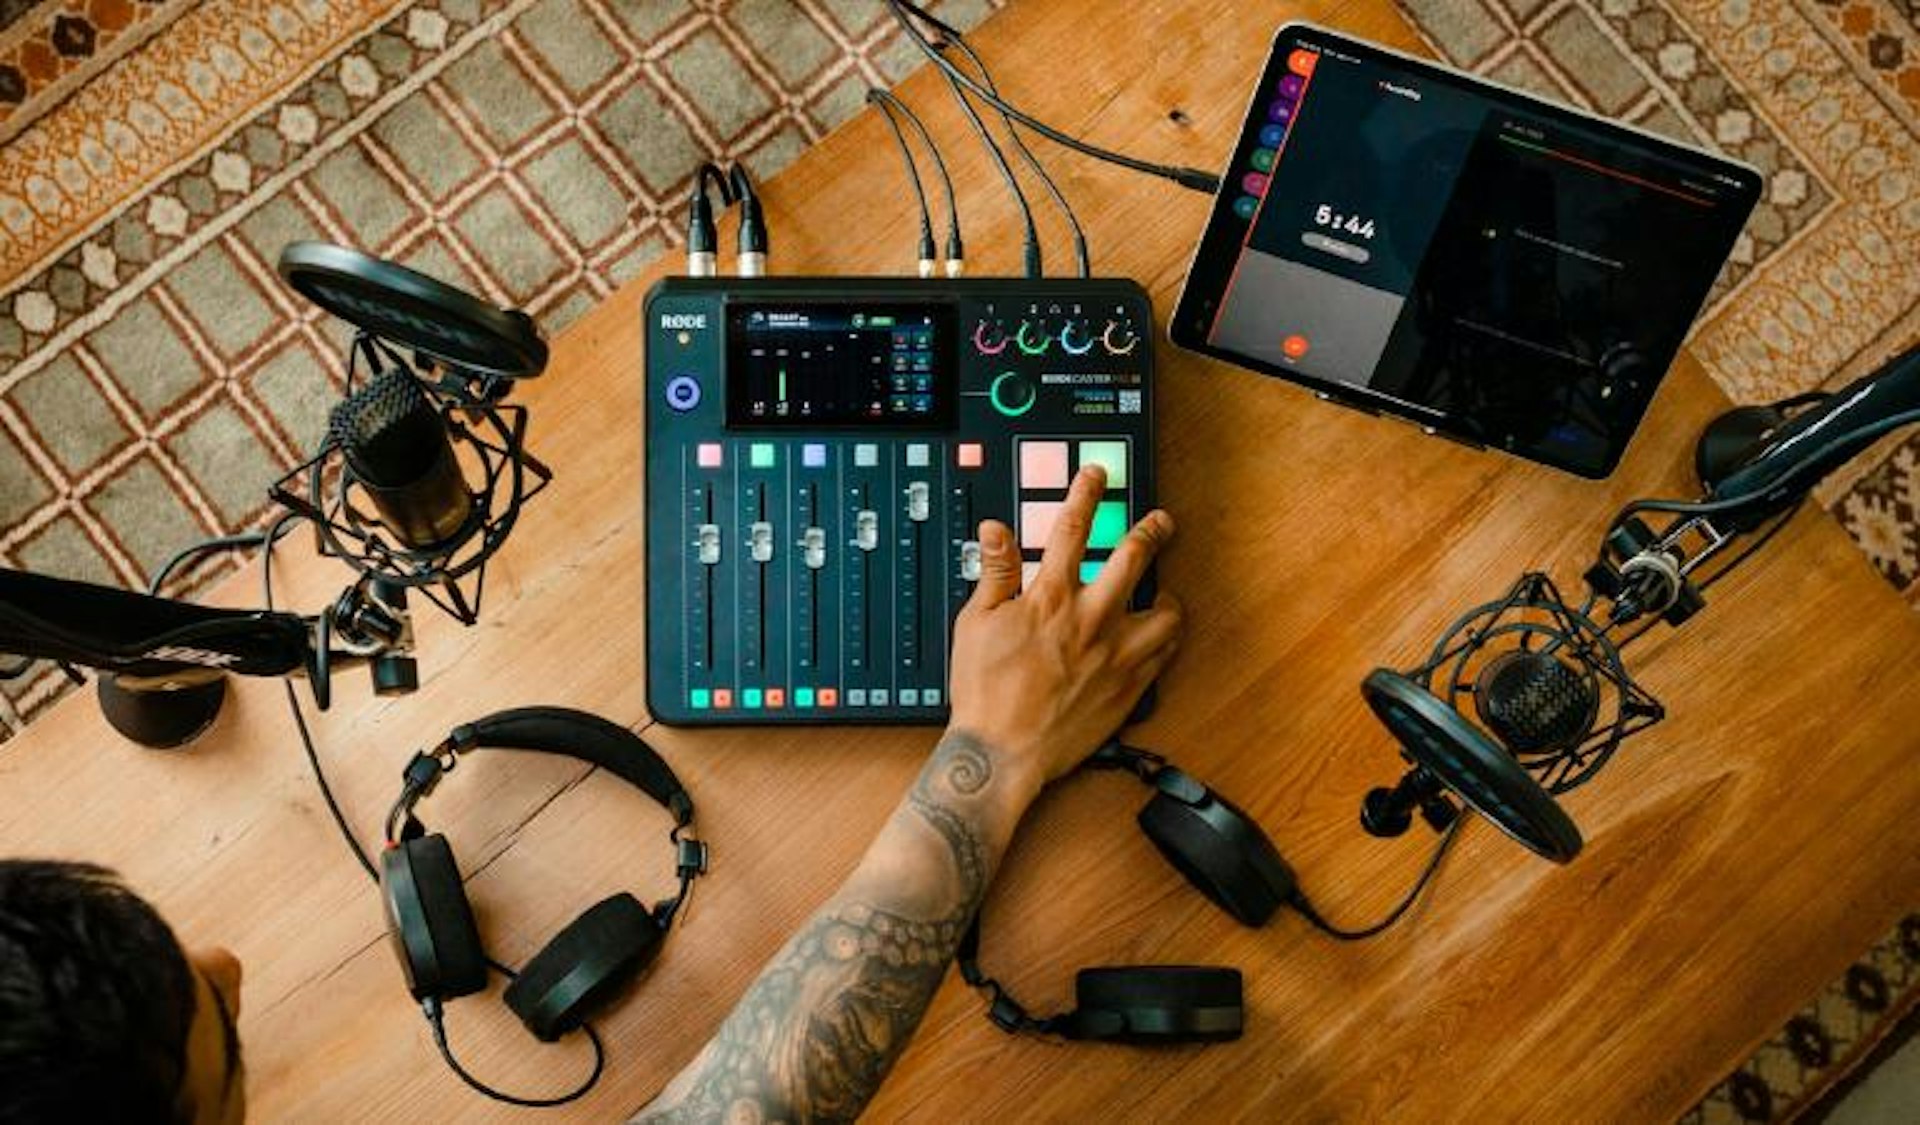 You can use the RØDE Podcast Bundle in place of Maono Podcast Equipment Bundles.